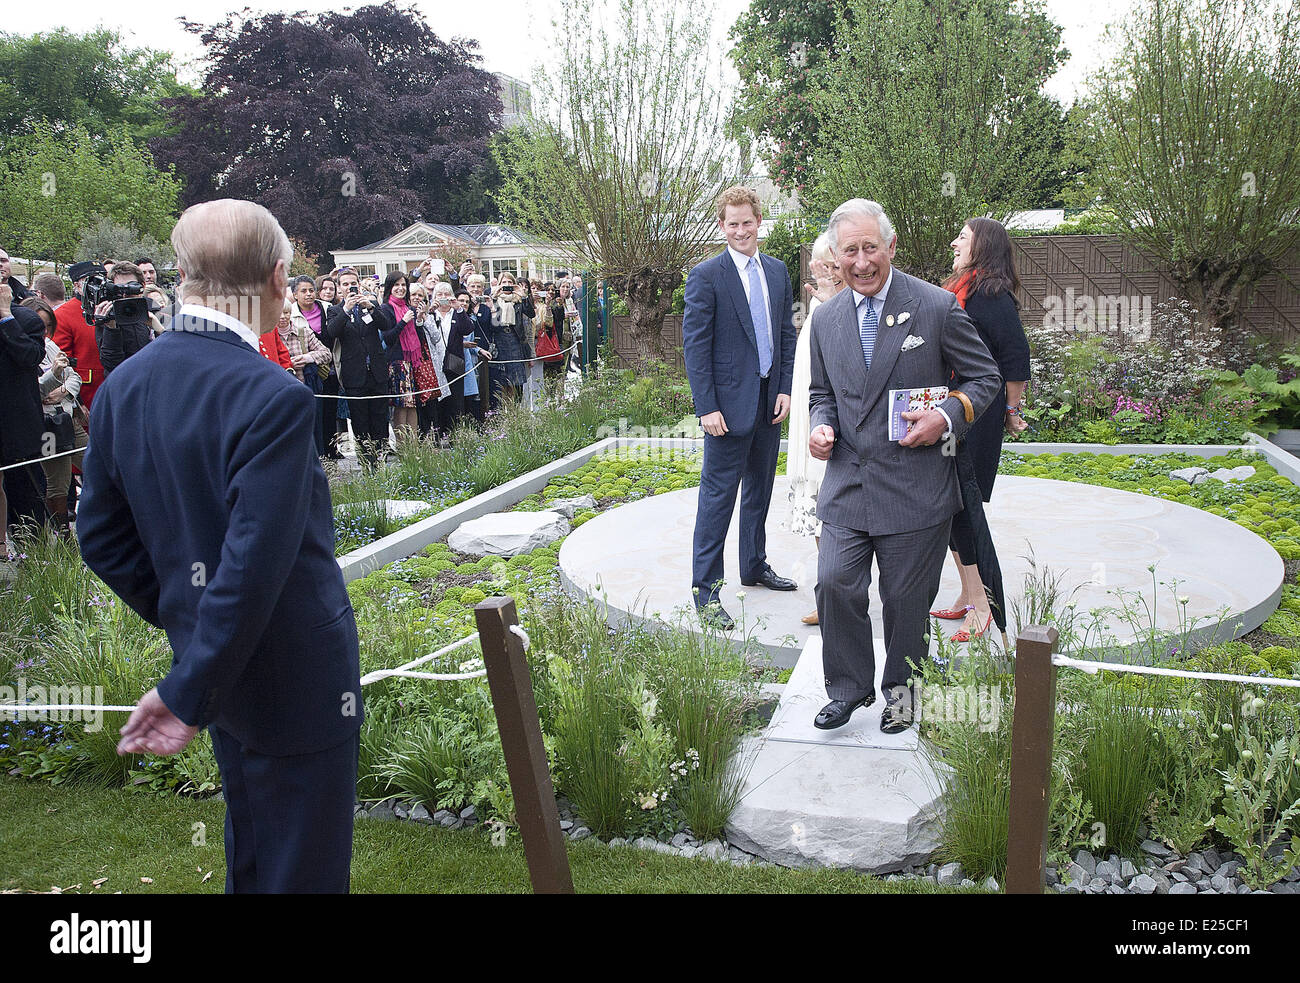 LONDON - UK - 20 MAY 2013: ROTA: Chelsea Flower Show 2013. Members of the Royal Family join HM Queen Elizabeth for a walk around the annual Chelsea Flower Show.  Prince Harry show his garden to his father Prince Charles Royal Rota photograph by Geoff Pugh/Supplied by Ian Jones Photography. NO Uk Sales for 28 days until 18-6-2013  Featuring: Charles,Prince of Wales,Prince Charles,Prince Harry,Prince Philip,Duke of Edinburgh Where: London, United Kingdom When: 20 May 2013 Stock Photo